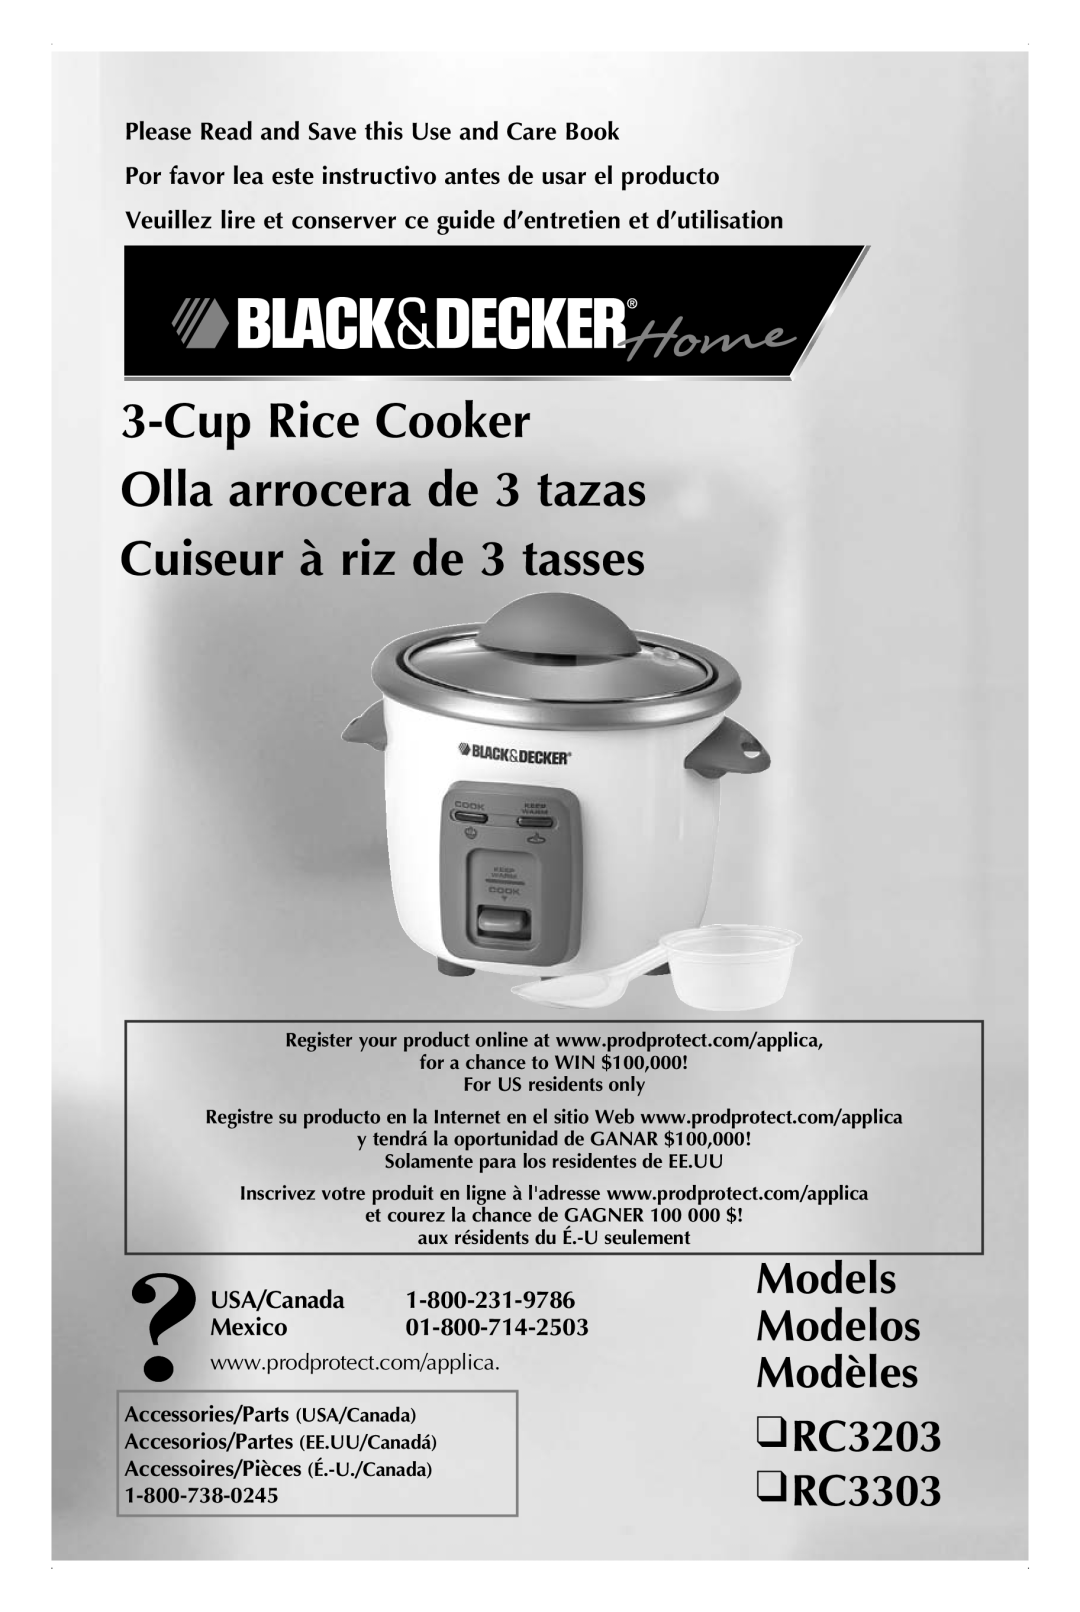 Black & Decker manual Models Modelos Modèles, RC3203 RC3303, Please Read and Save this Use and Care Book 